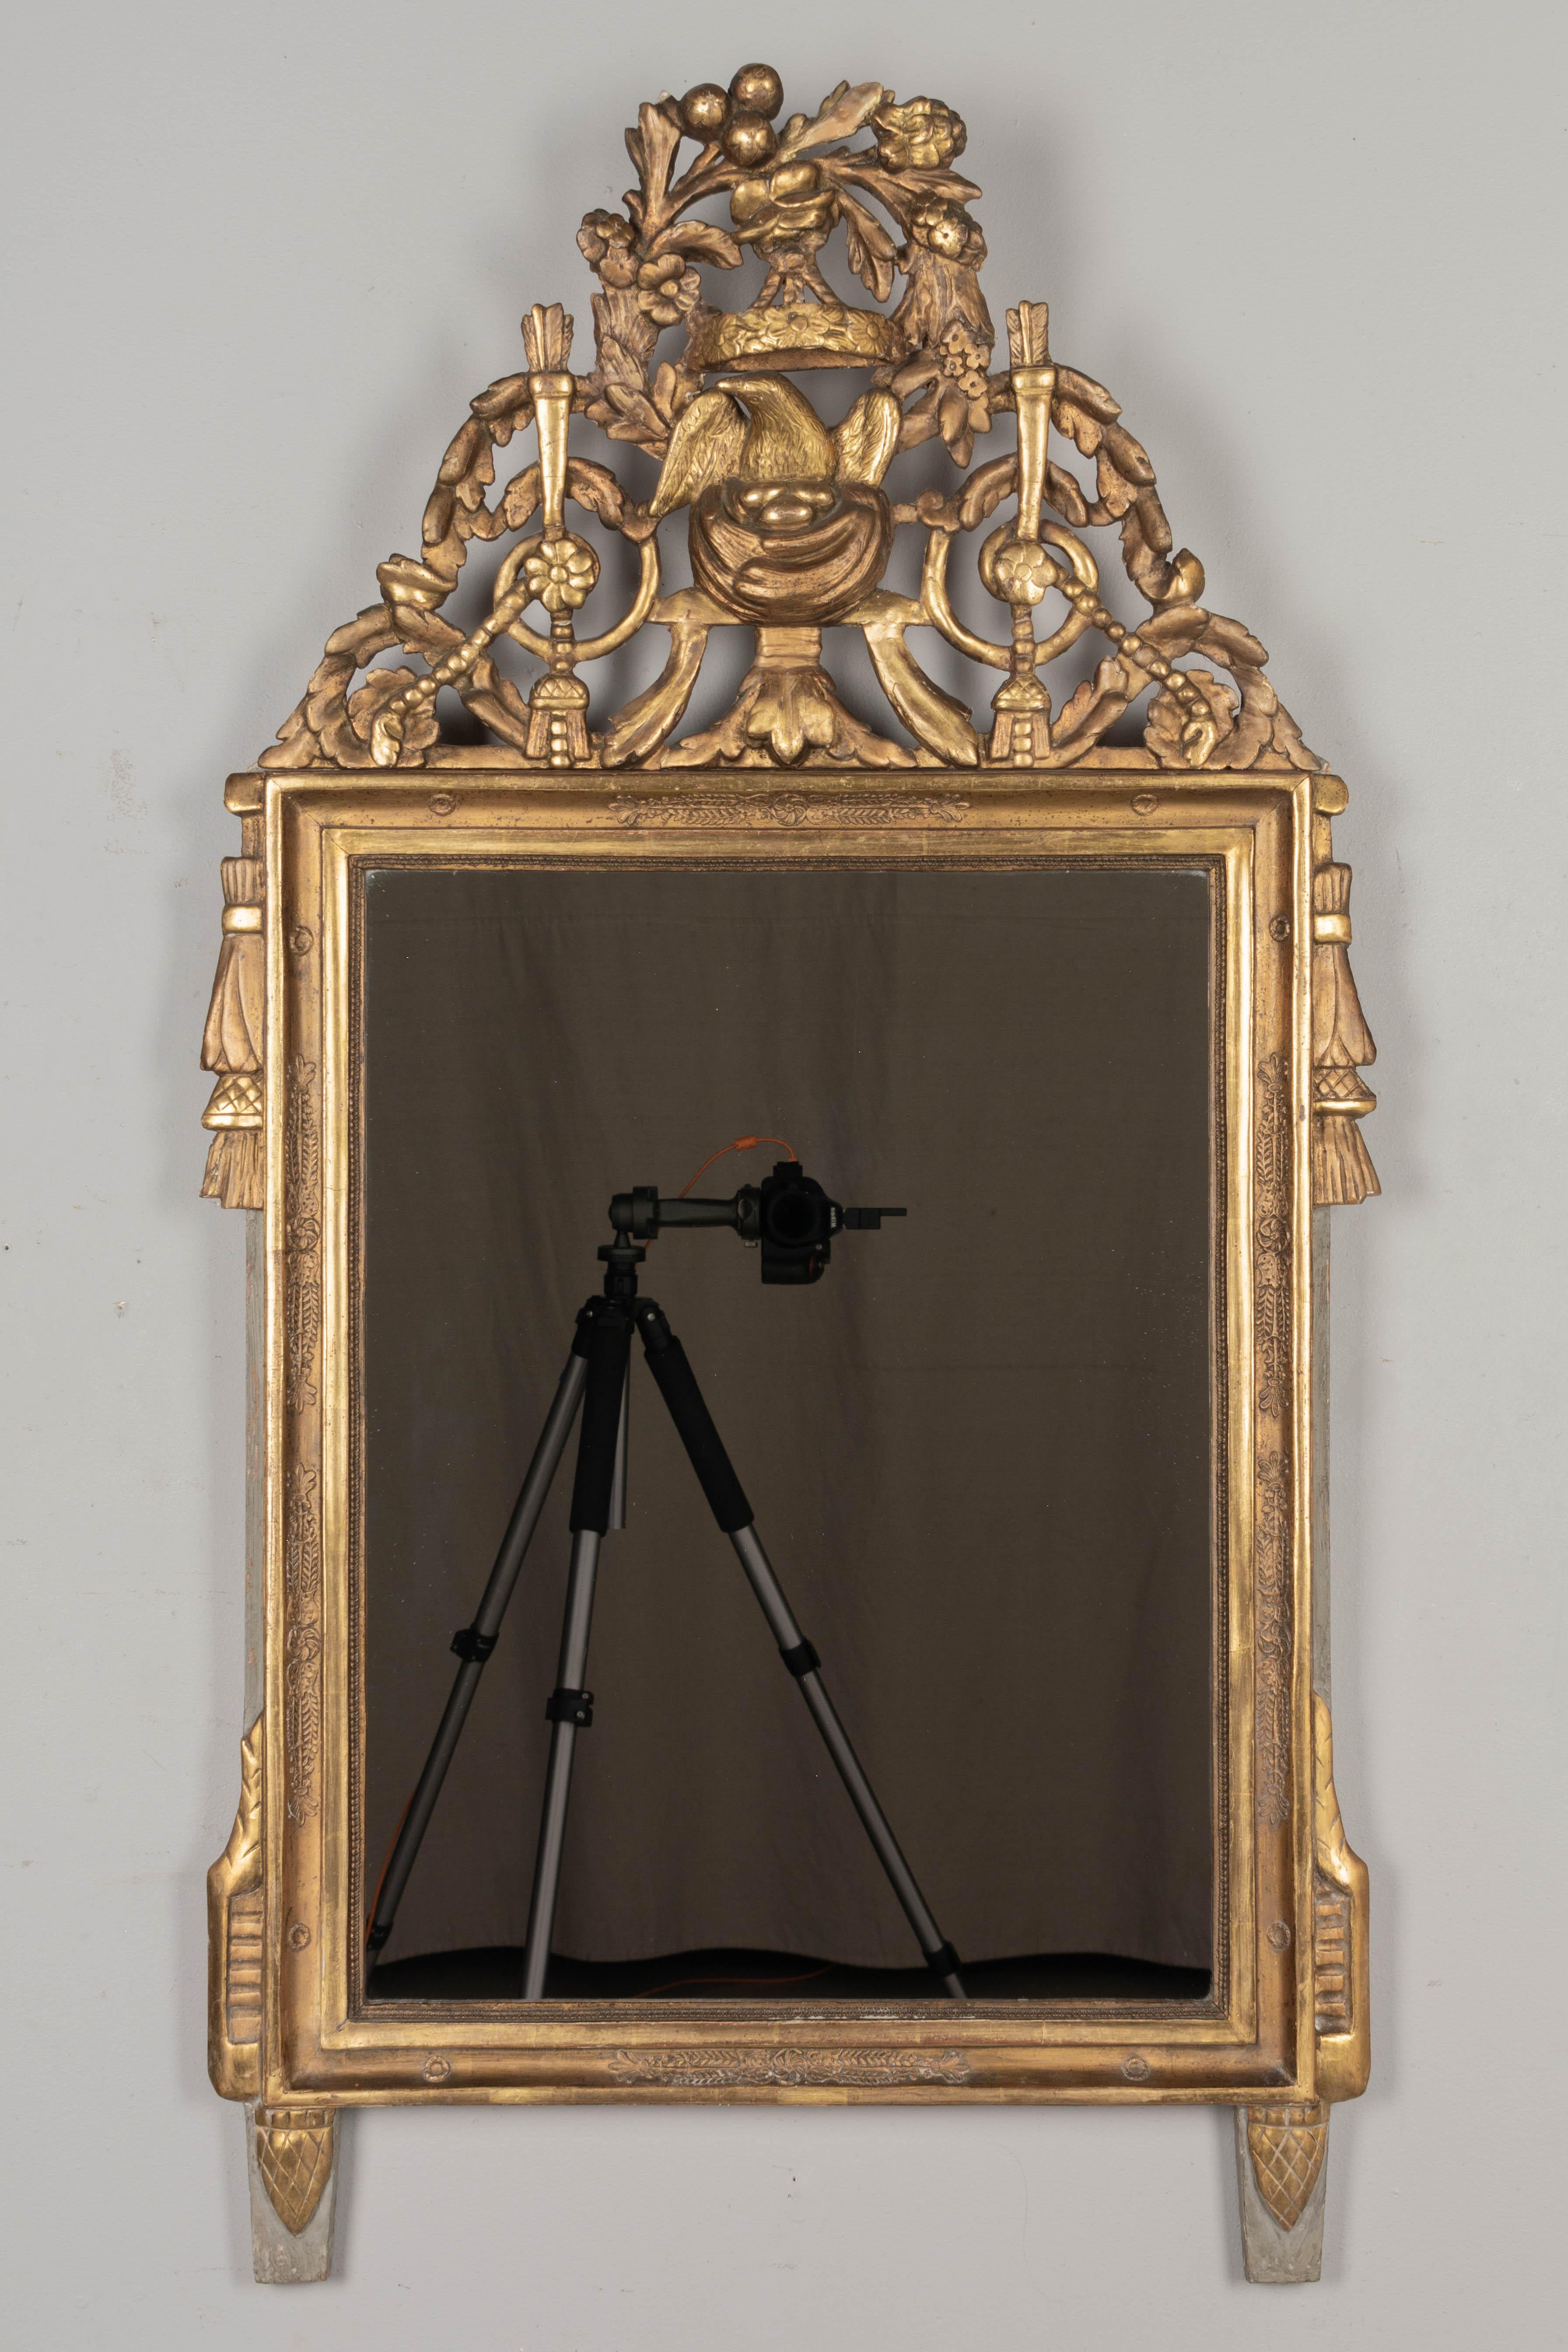 A late 18th Century Louis XVI style parcel-gilt mirror. Elaborate three- dimensional carved crest with a bird's nest under a floral wreath canopy surrounded by scrolling garlands. Beautifully detailed. Pale verdigris painted outside edge and feet.